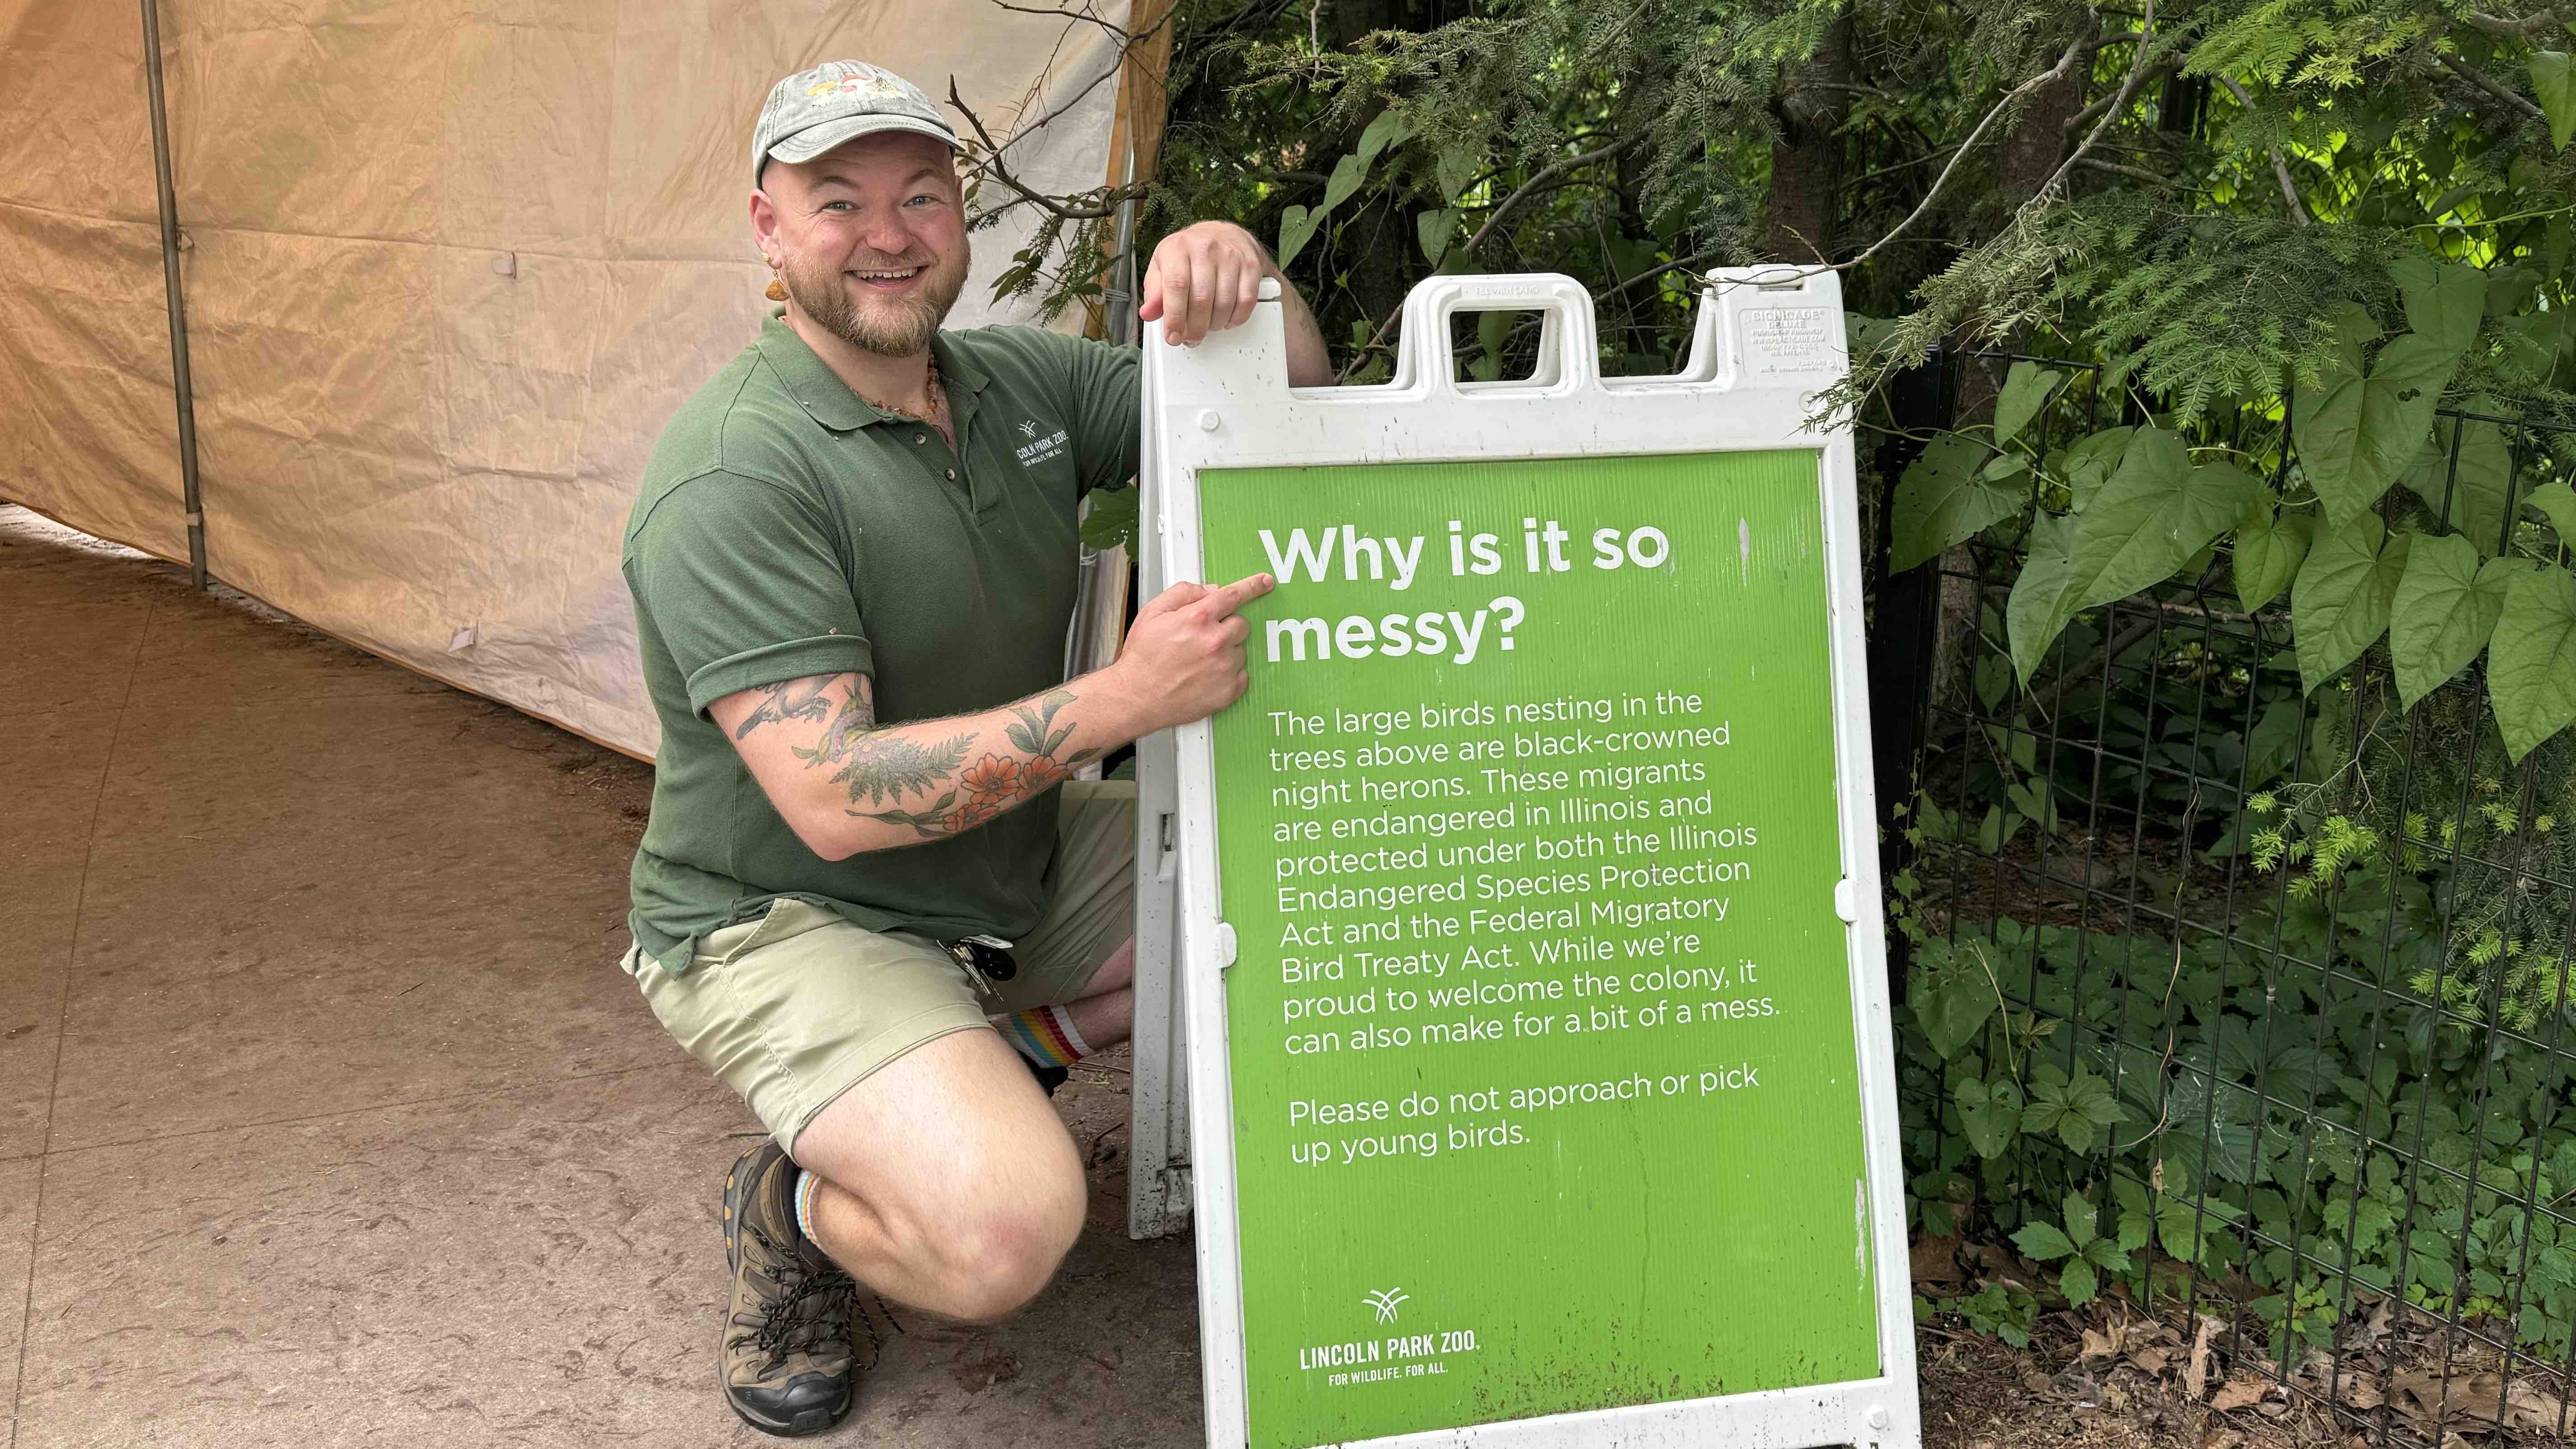 Having the night heron colony at the zoo gives ecologist Henry Adams plenty of opportunities for research and to share conservation information with visitors. (Patty Wetli / WTTW News)